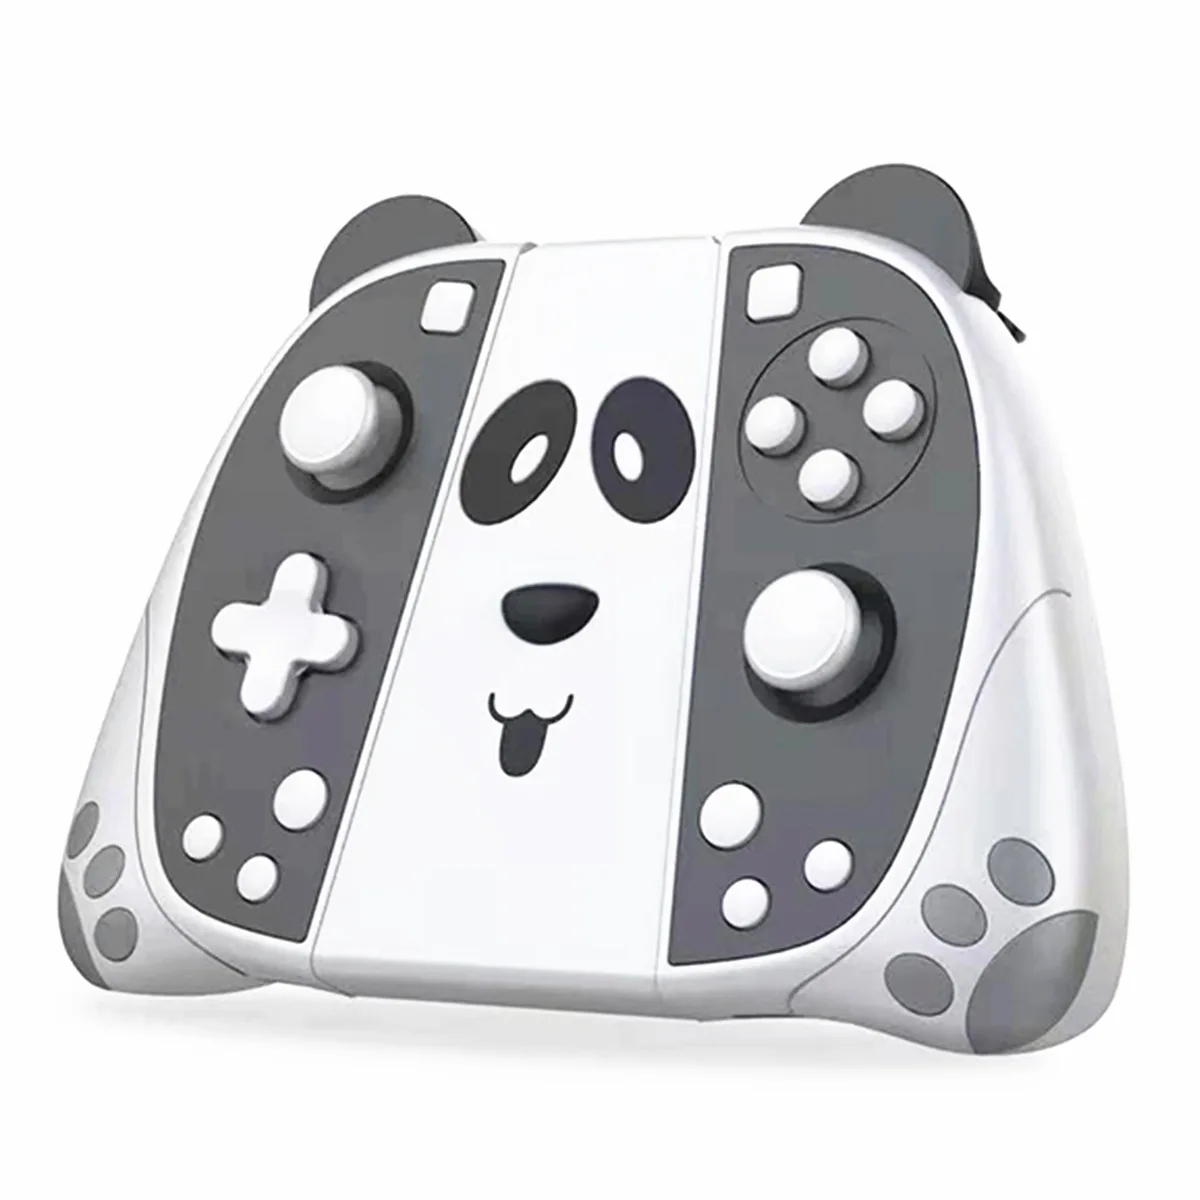 

NEW Panda Game Wireless Controller Left&Right Bluetooth Gamepad For Nintend Switch NS Joy Game Con Handle Grip joypad Wake Up